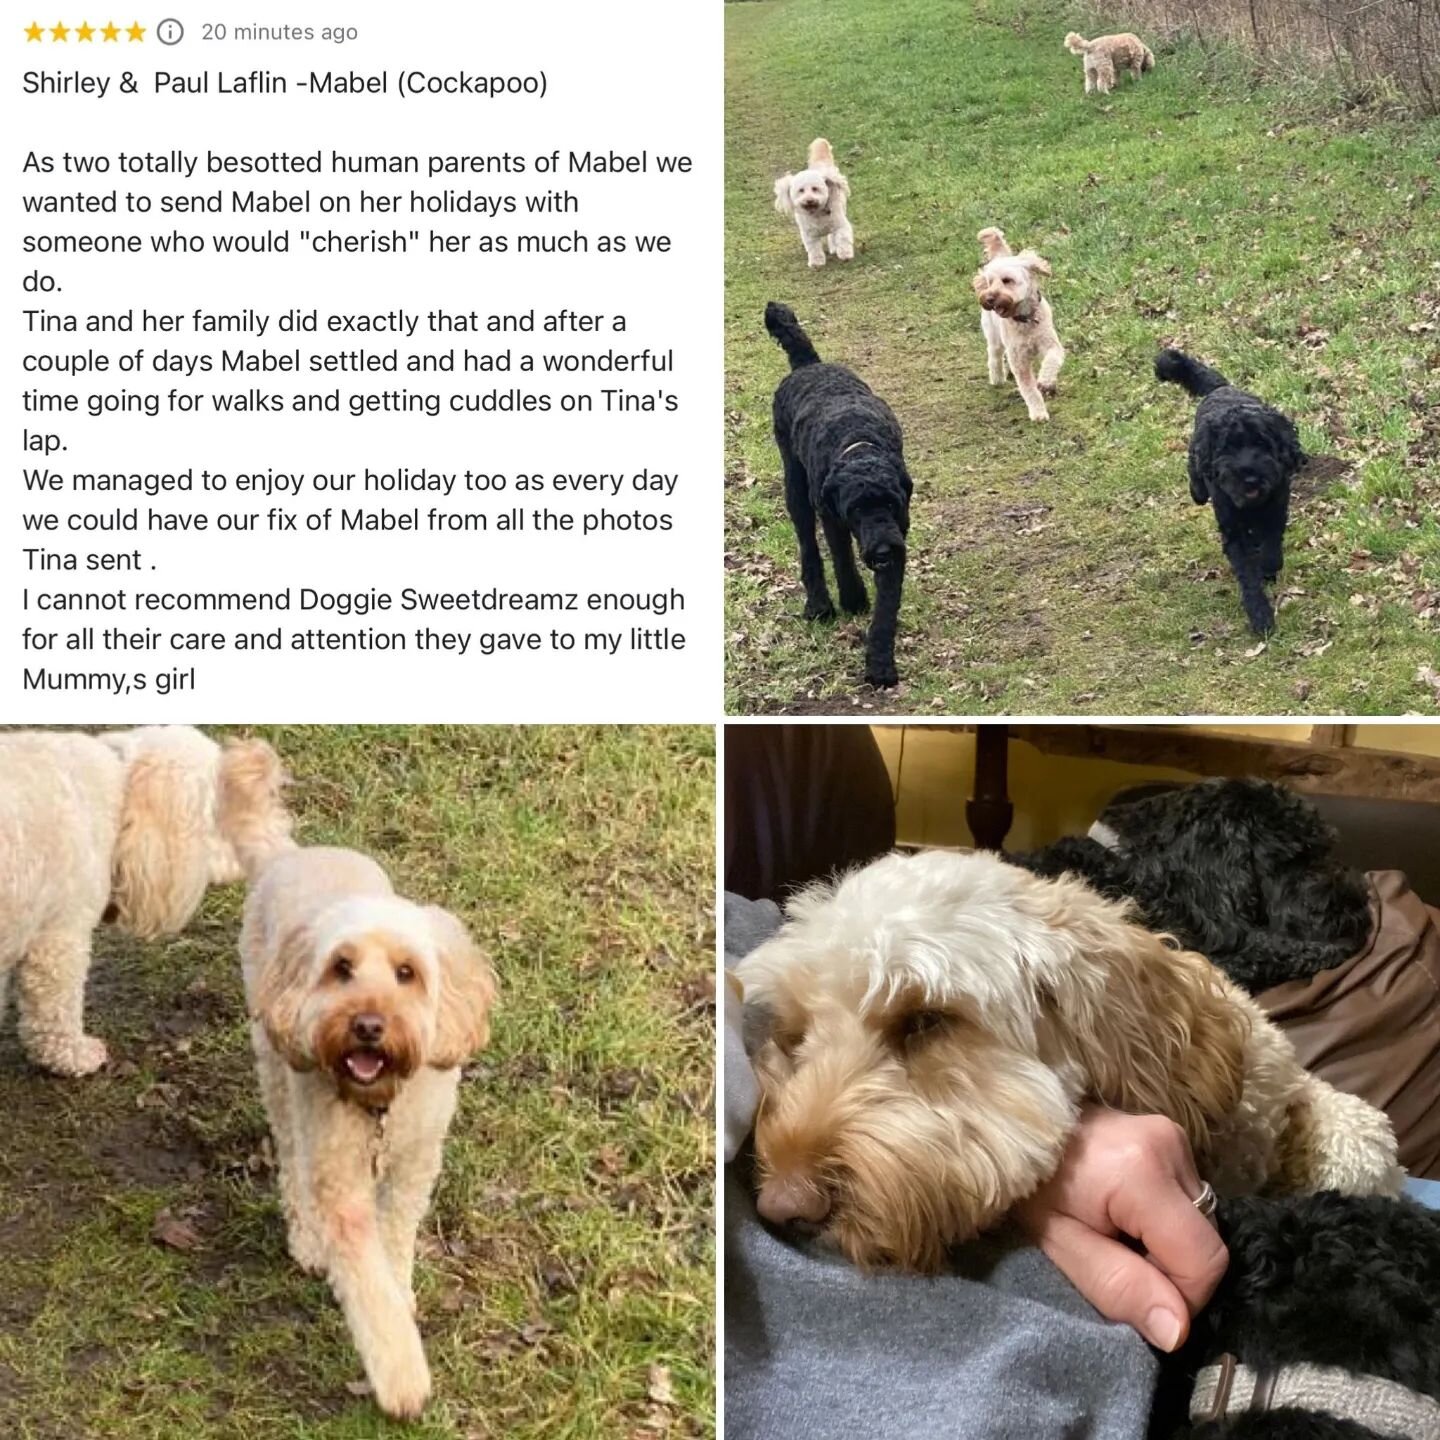 A lovely review from a lovely client. 

#thankyou #grateful #review #google #googlereview #cockerpoo #homefromhome #homefromhomedogboarding #dogboarding